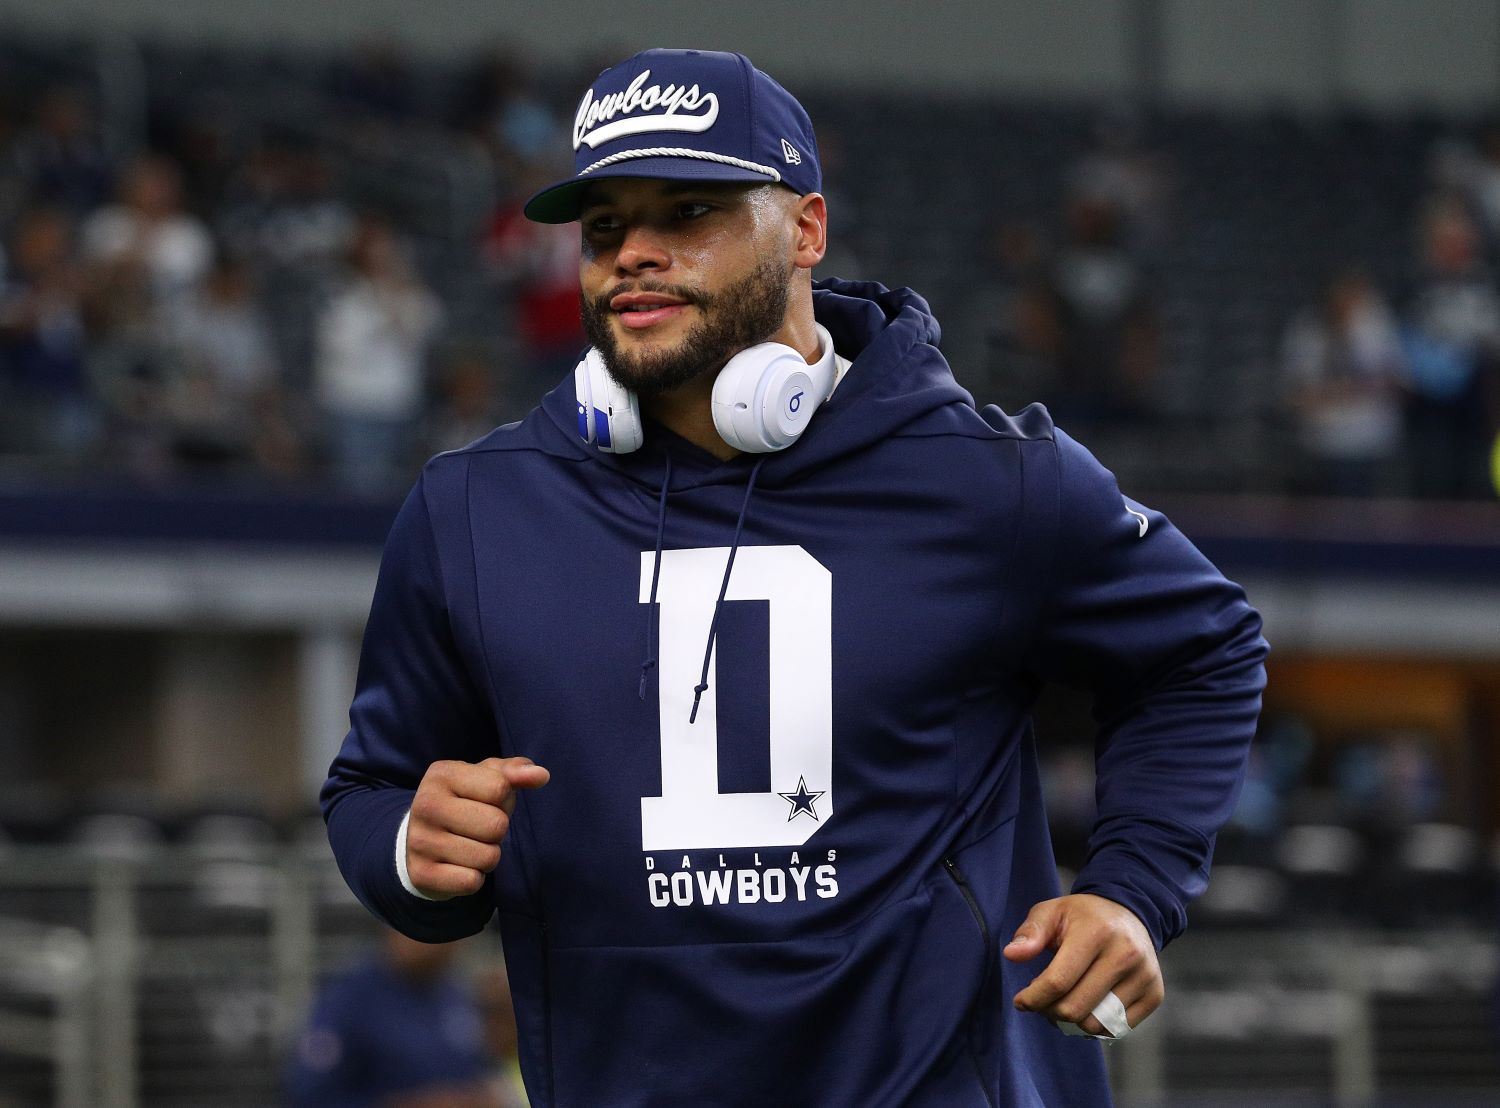 Cowboys CEO Stephen Jones provided an encouraging update on Dak Prescott, but will Dallas still sign him to a massive contract extension?